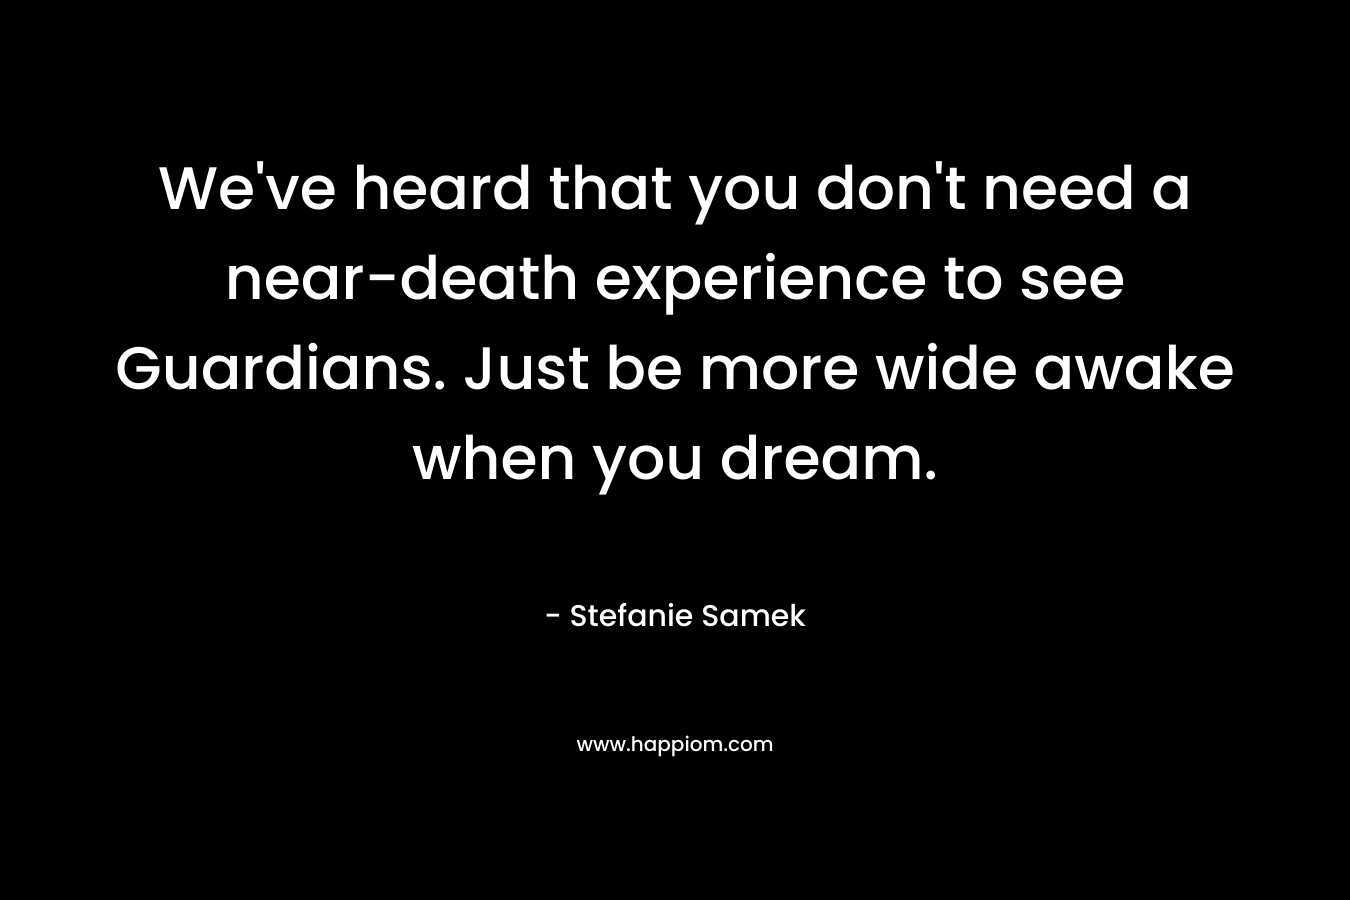 We’ve heard that you don’t need a near-death experience to see Guardians. Just be more wide awake when you dream. – Stefanie Samek